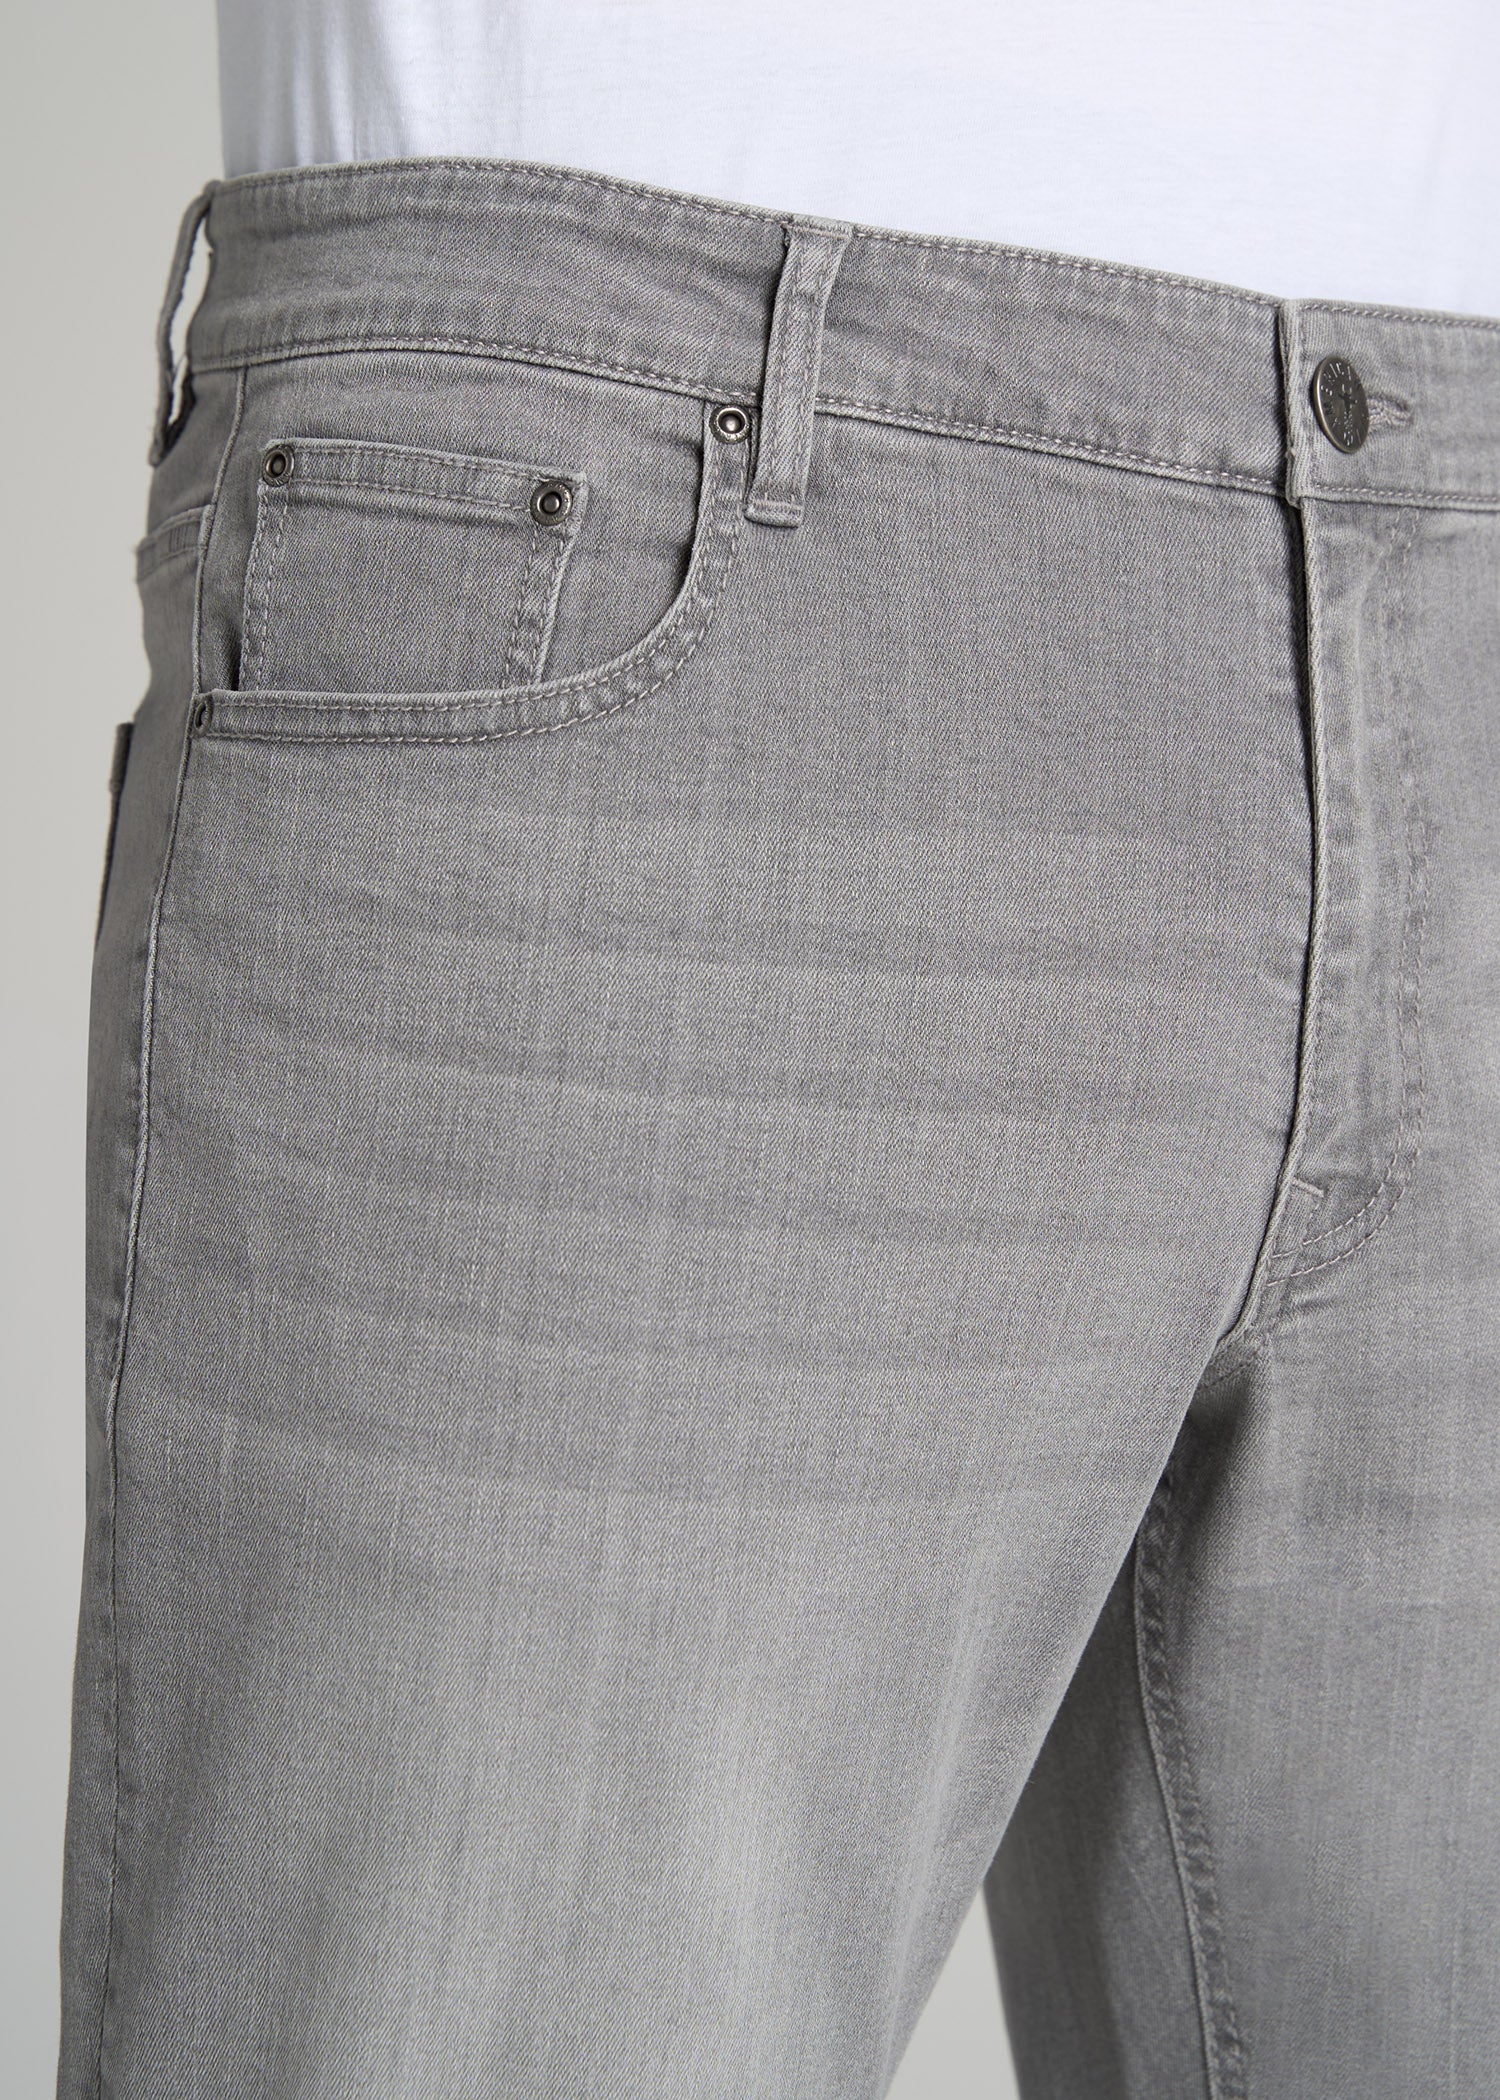    American-Tall-Men-Carman-Tapered-Fit-Jeans-Concrete-Grey-pocket